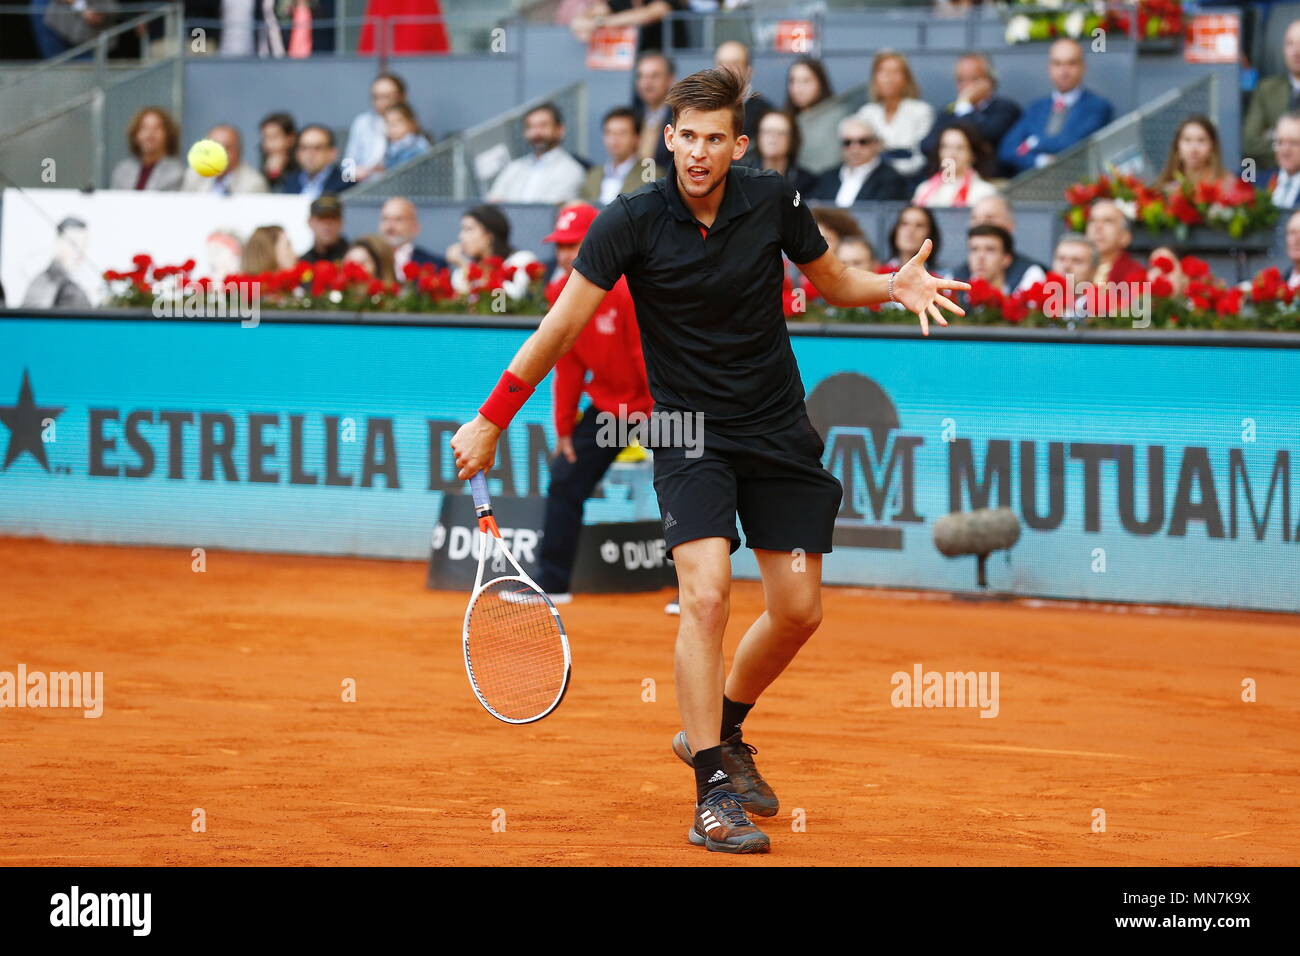 Madrid, Spain, May 13, 2018. 13th May, 2018. Dominic Thiem (AUT) Tennis :  Dominic Thiem of Austria during singles final round match against Alexander  Zverev of Germany on the ATP World Tour